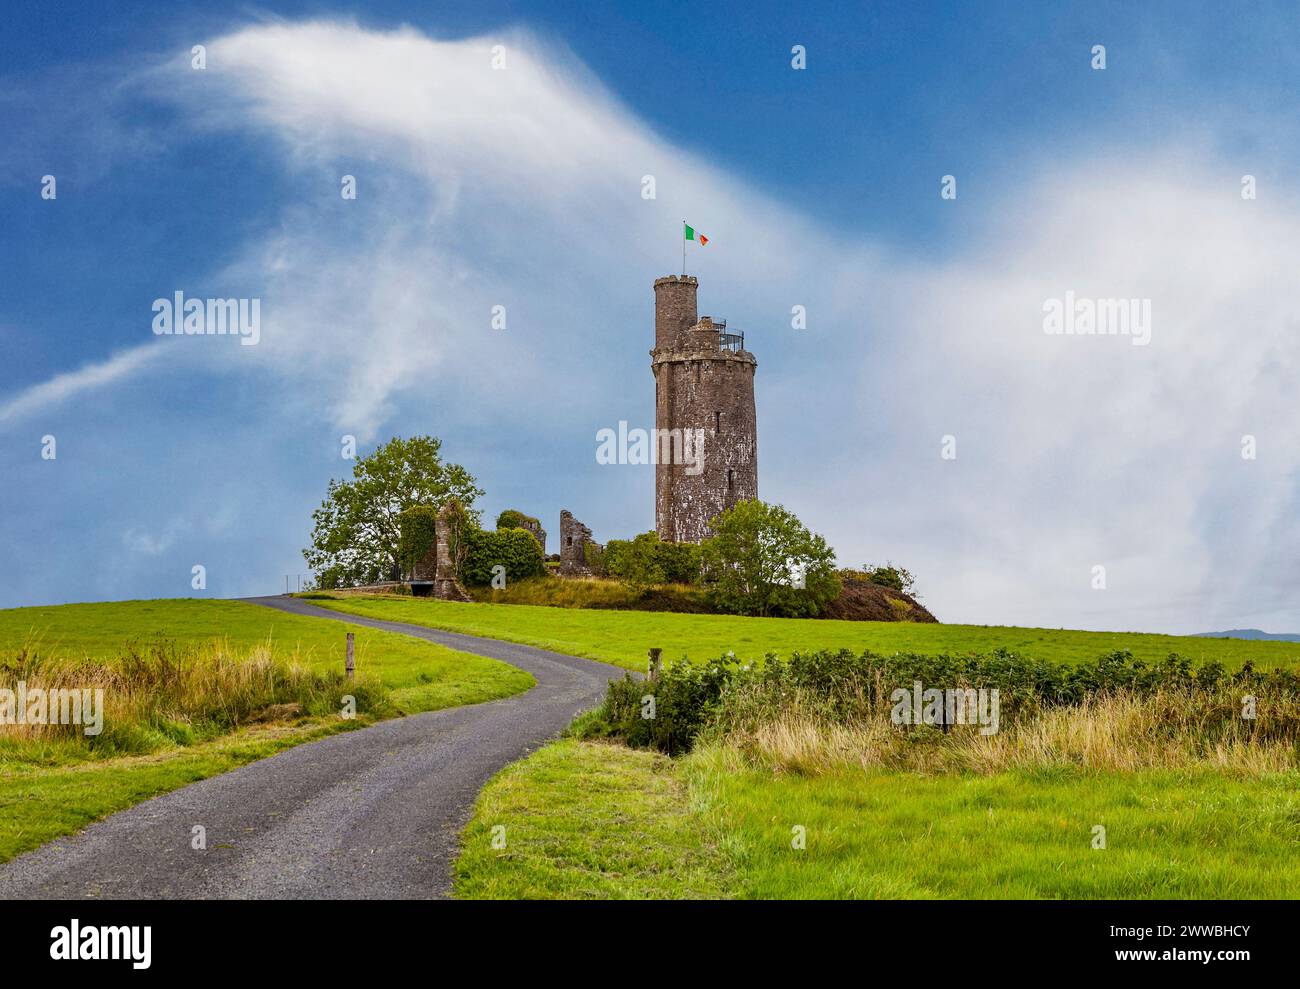 The old folly tower in Ballyfin demesne in County Laois, built by Sir Richard and William Vitruvius Morrison in the 1820s. Stock Photo